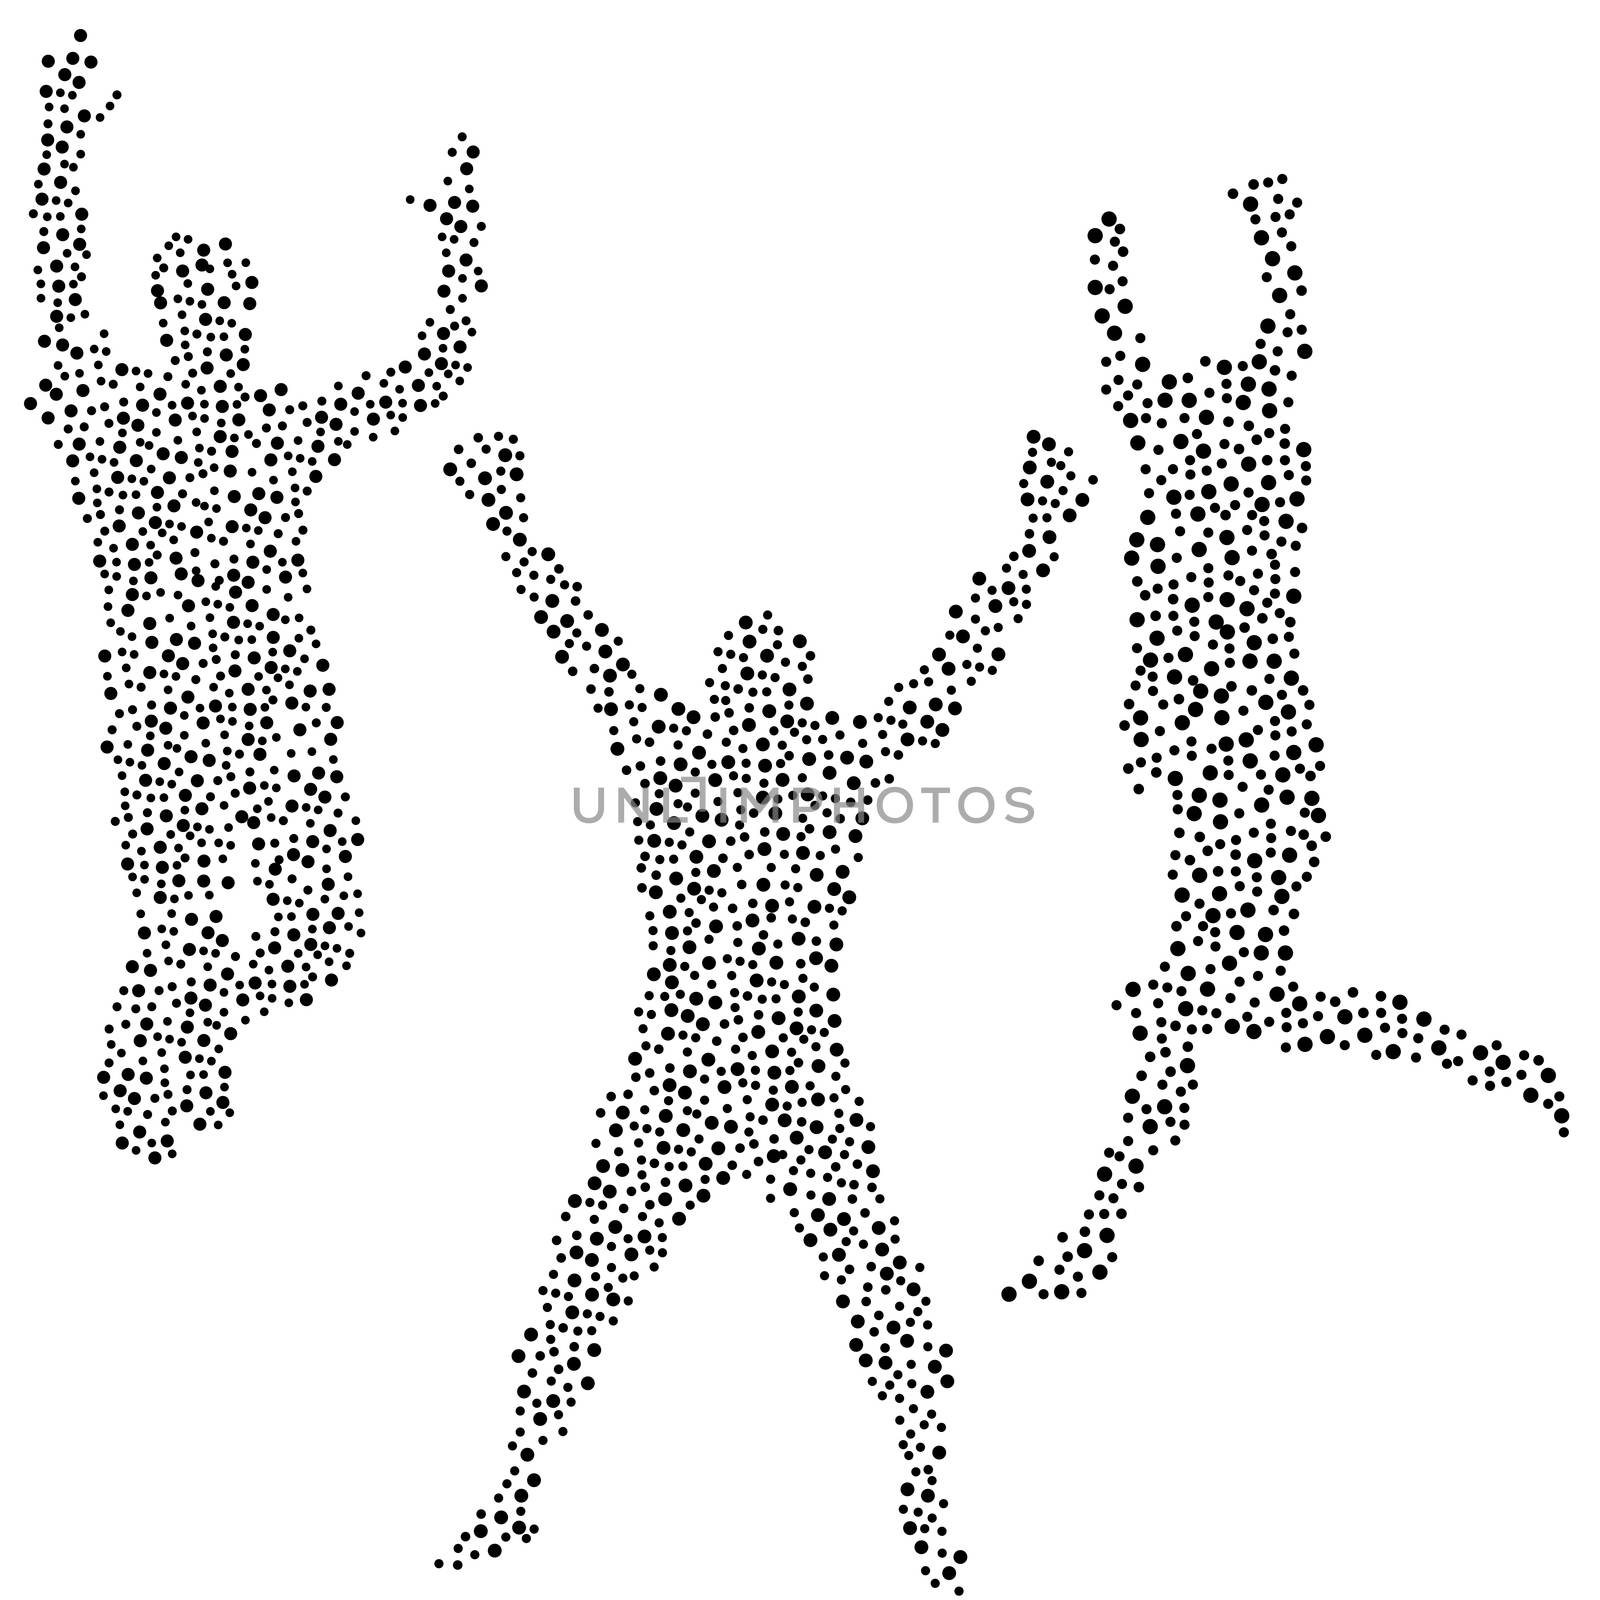 Dots silhouettes of men jumping by hibrida13